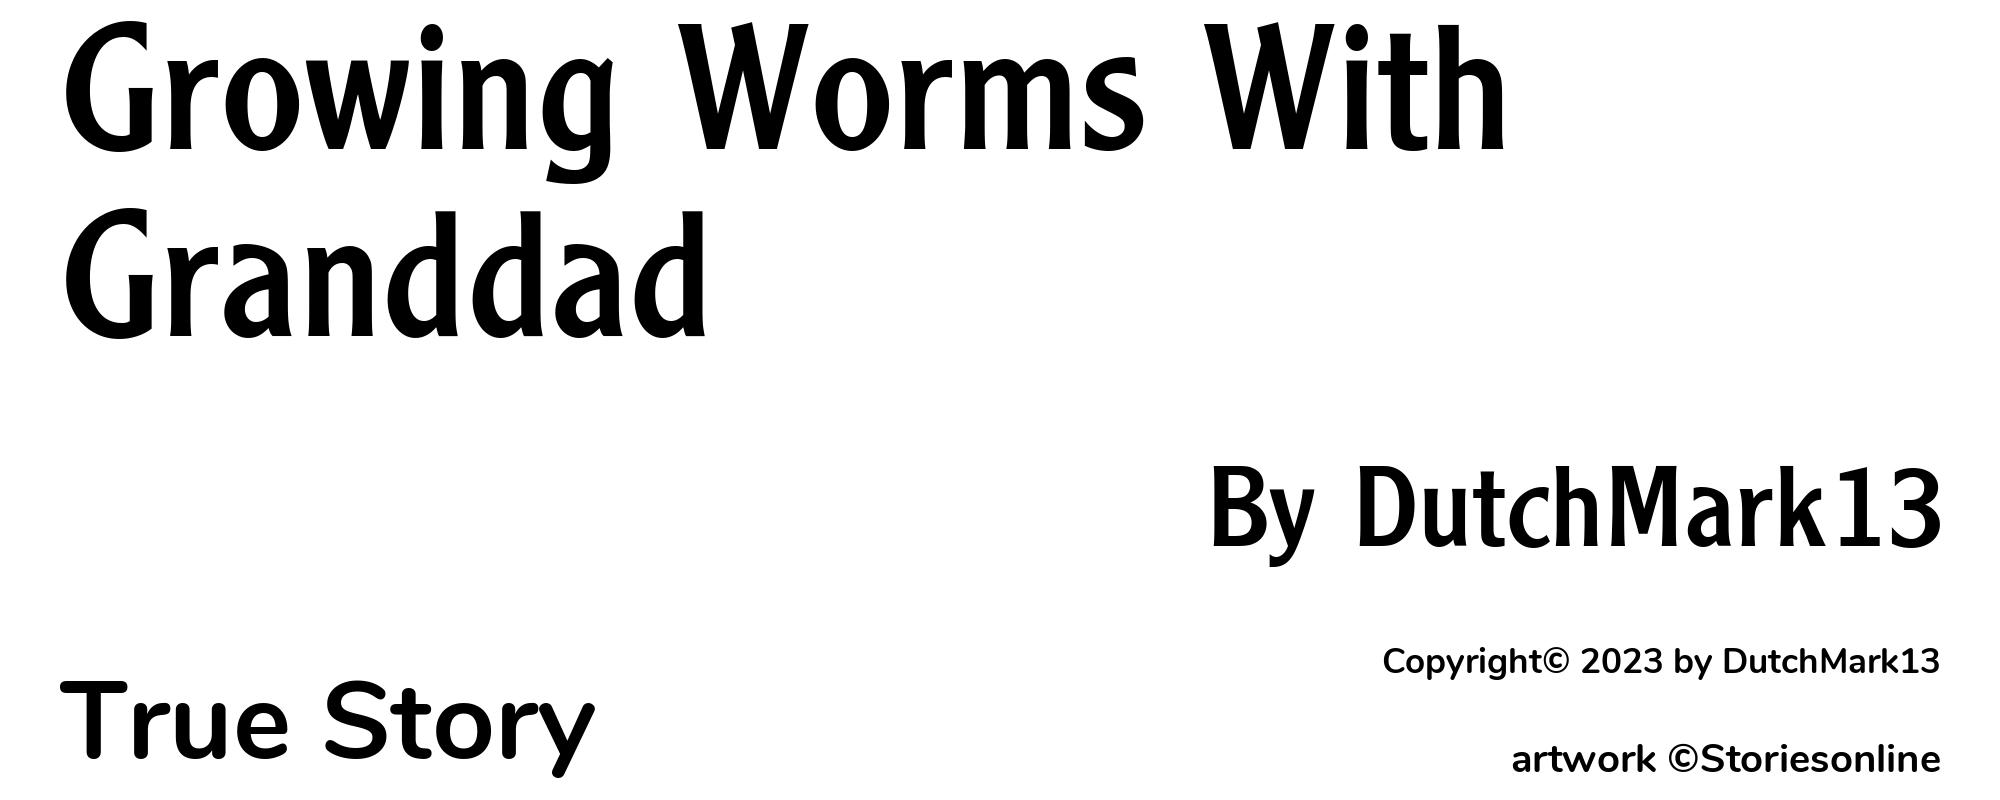 Growing Worms With Granddad - Cover